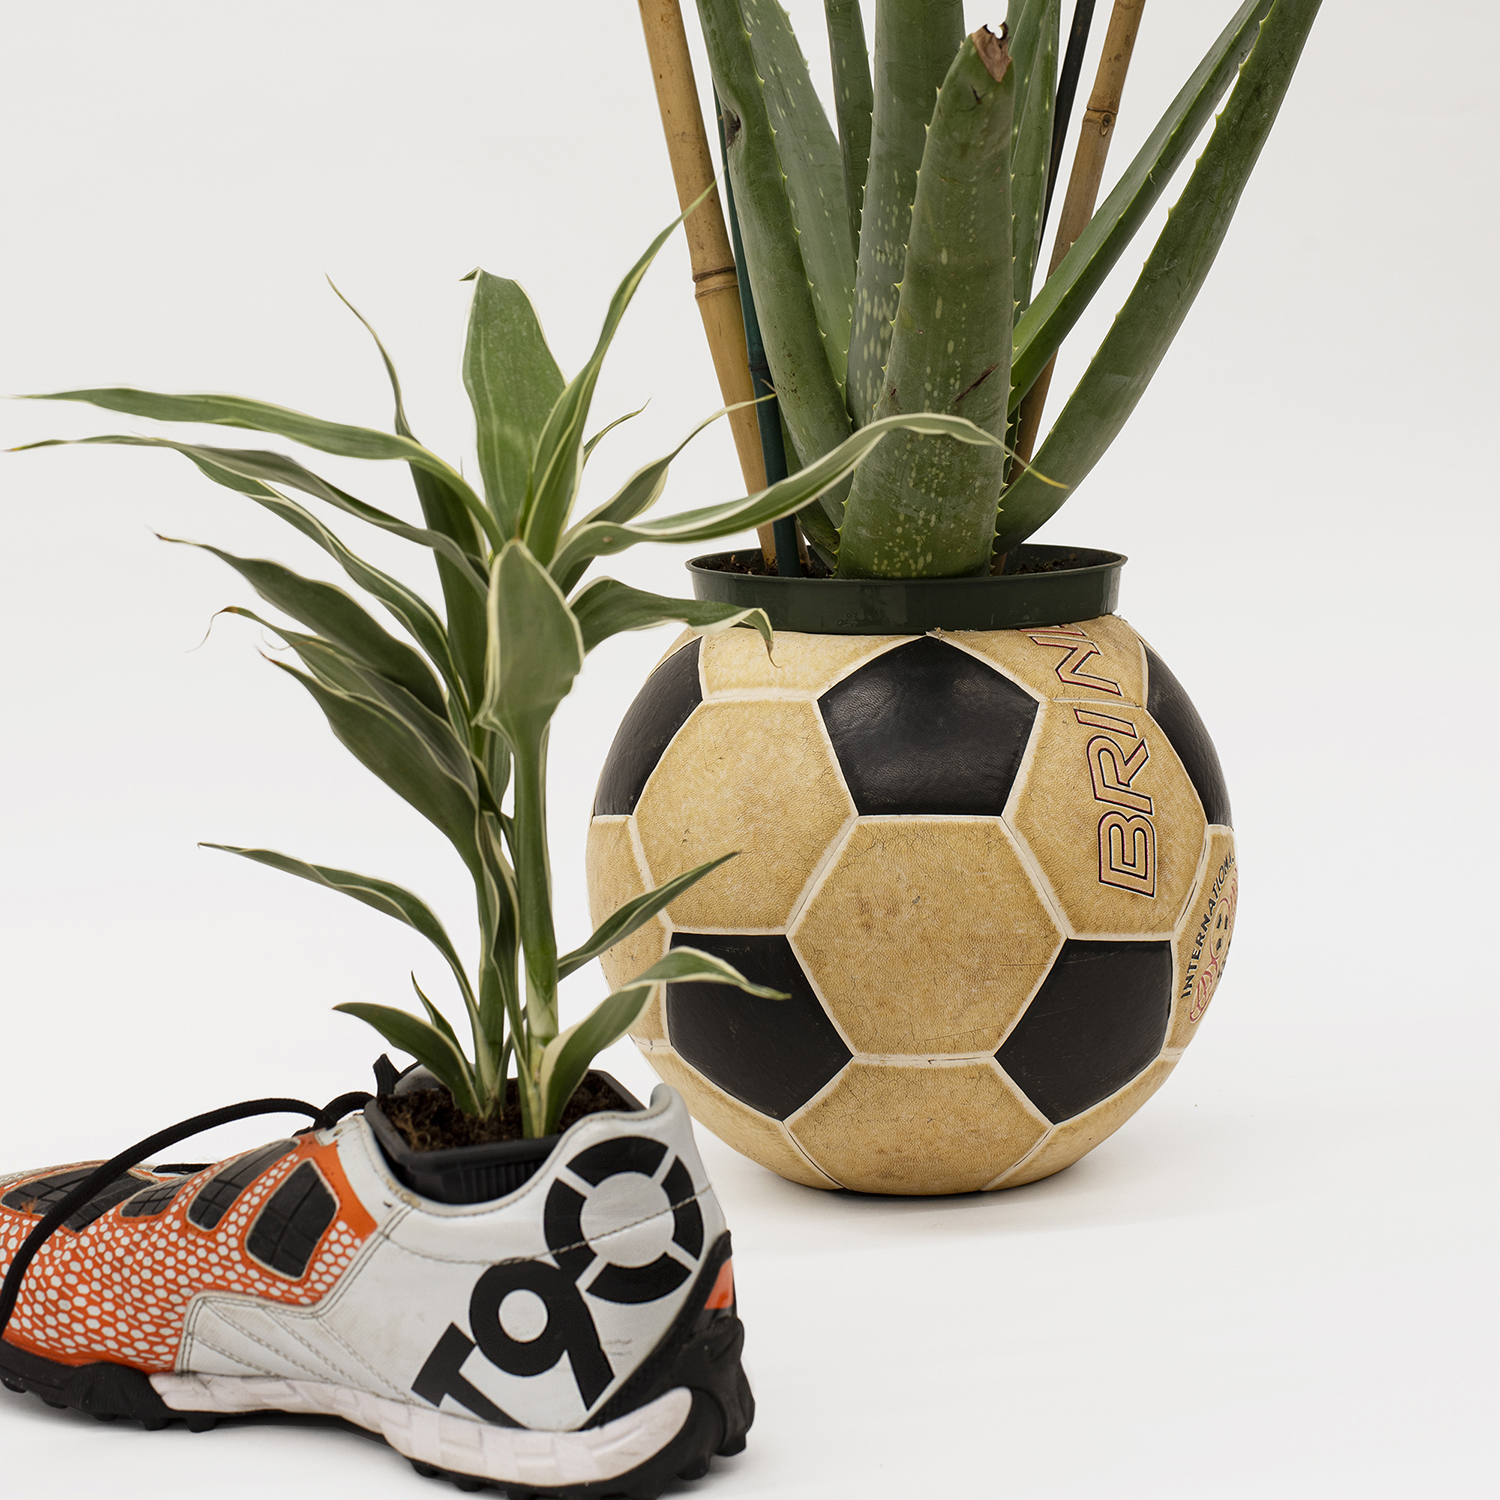 Plants in a soccer ball and a running shoe